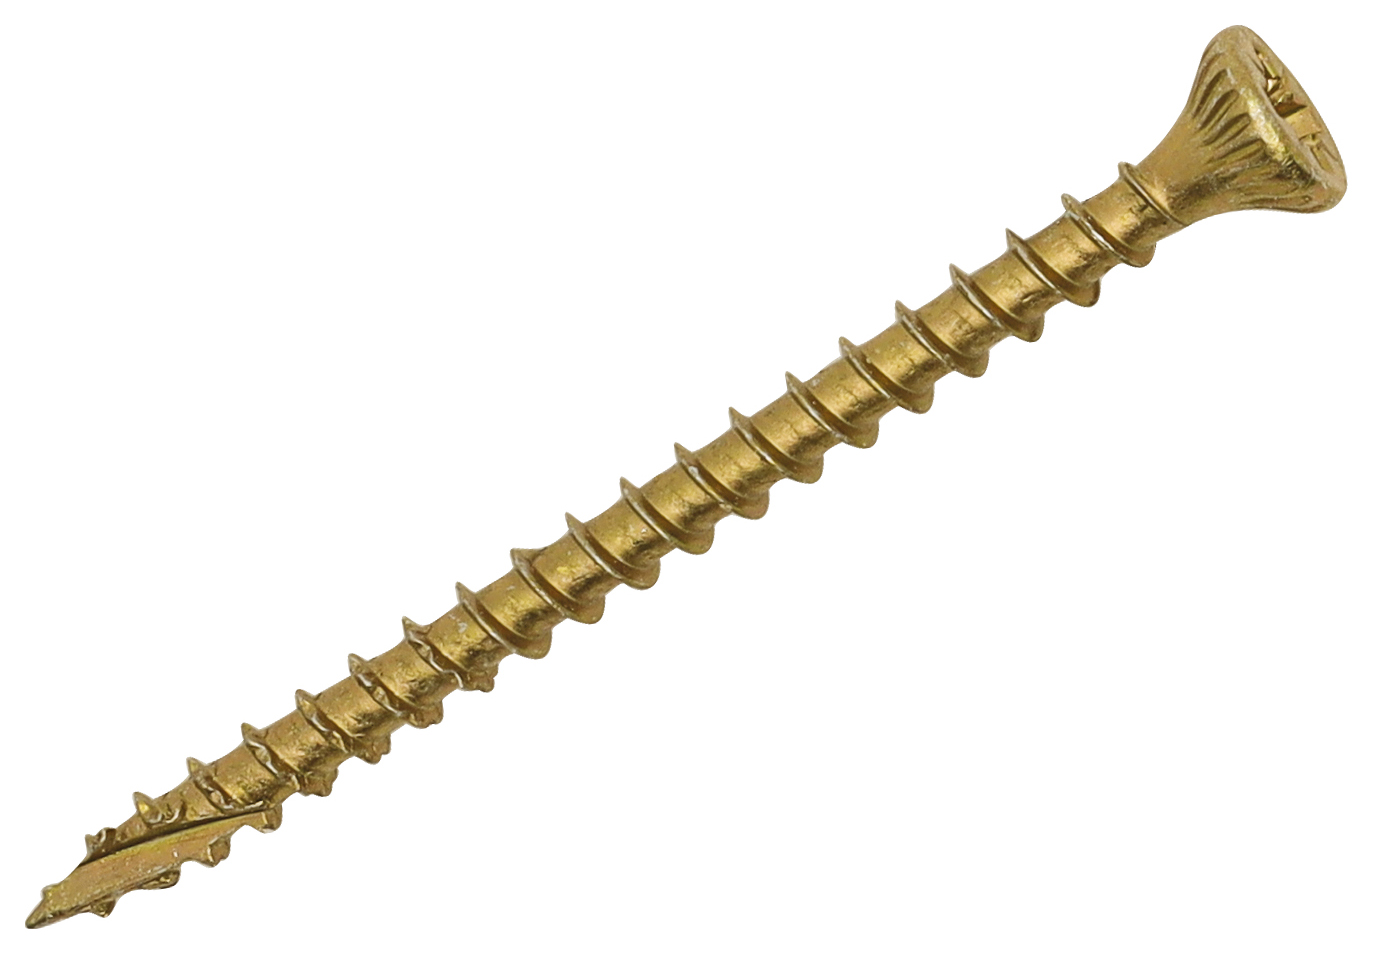 Image of Optimaxx PZ Countersunk Passivated Wood Screw - 3.5 x 50mm - Pack of 200